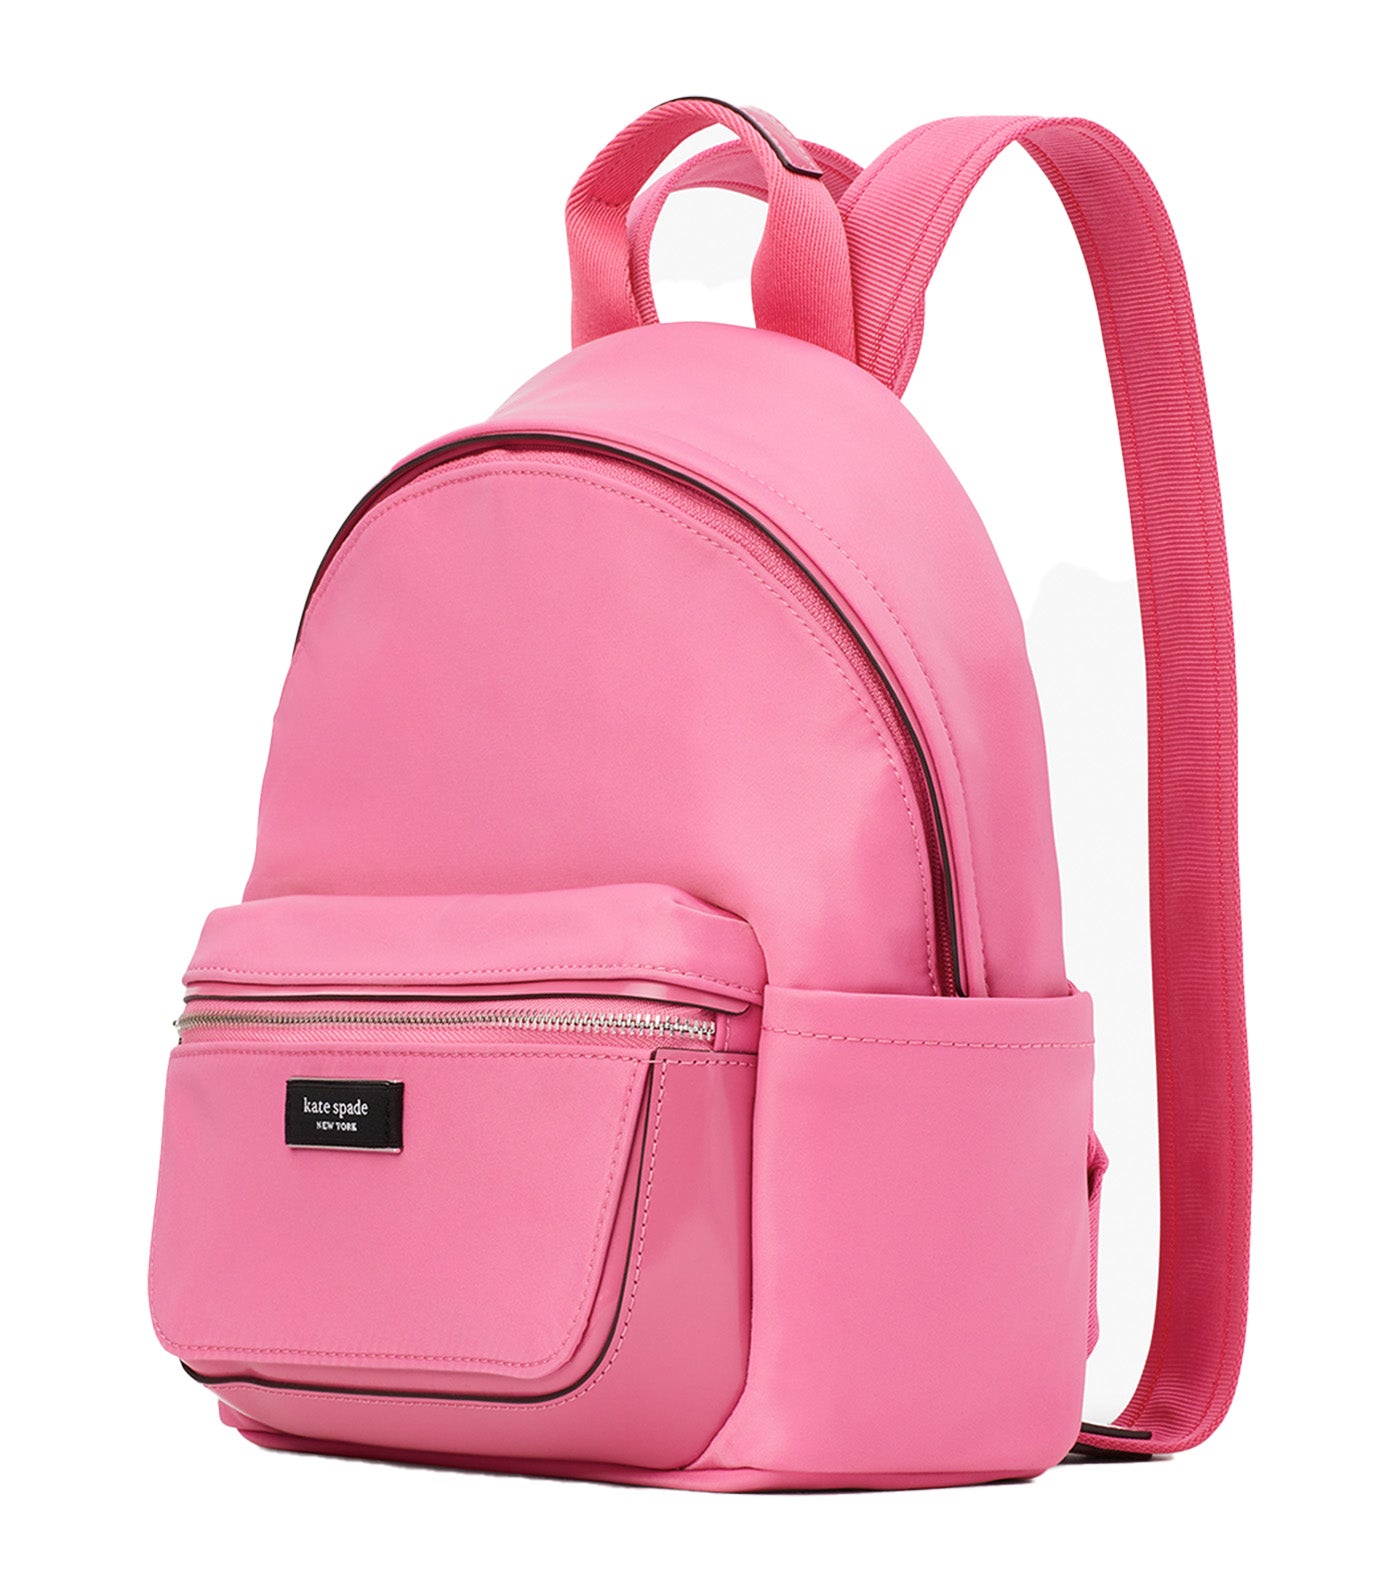 Sam Icon KSNYL Small Backpack Pink Cloud